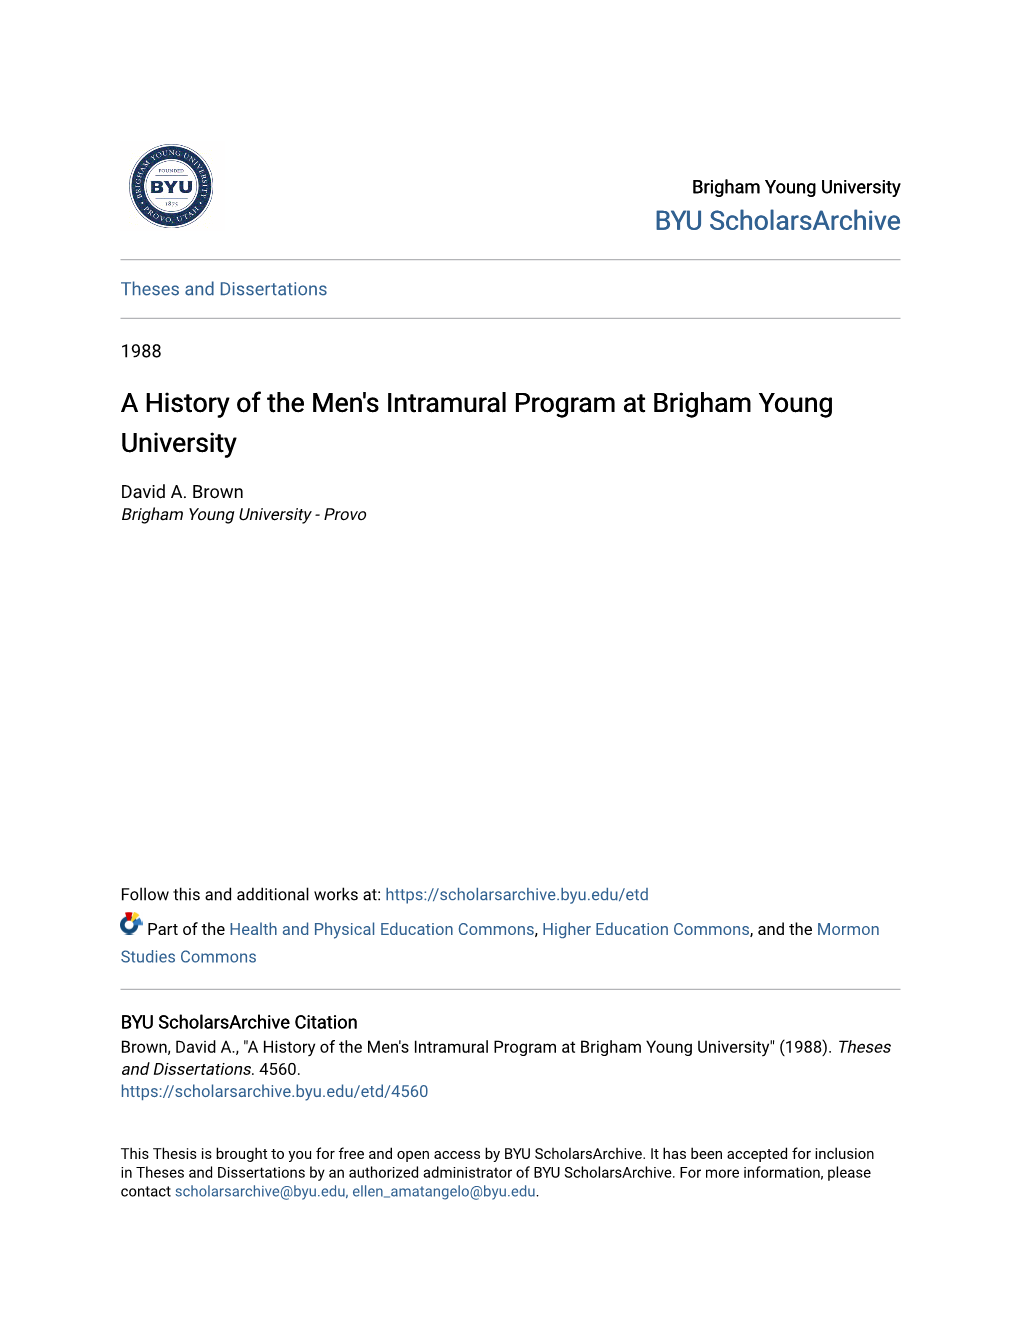 A History of the Men's Intramural Program at Brigham Young University